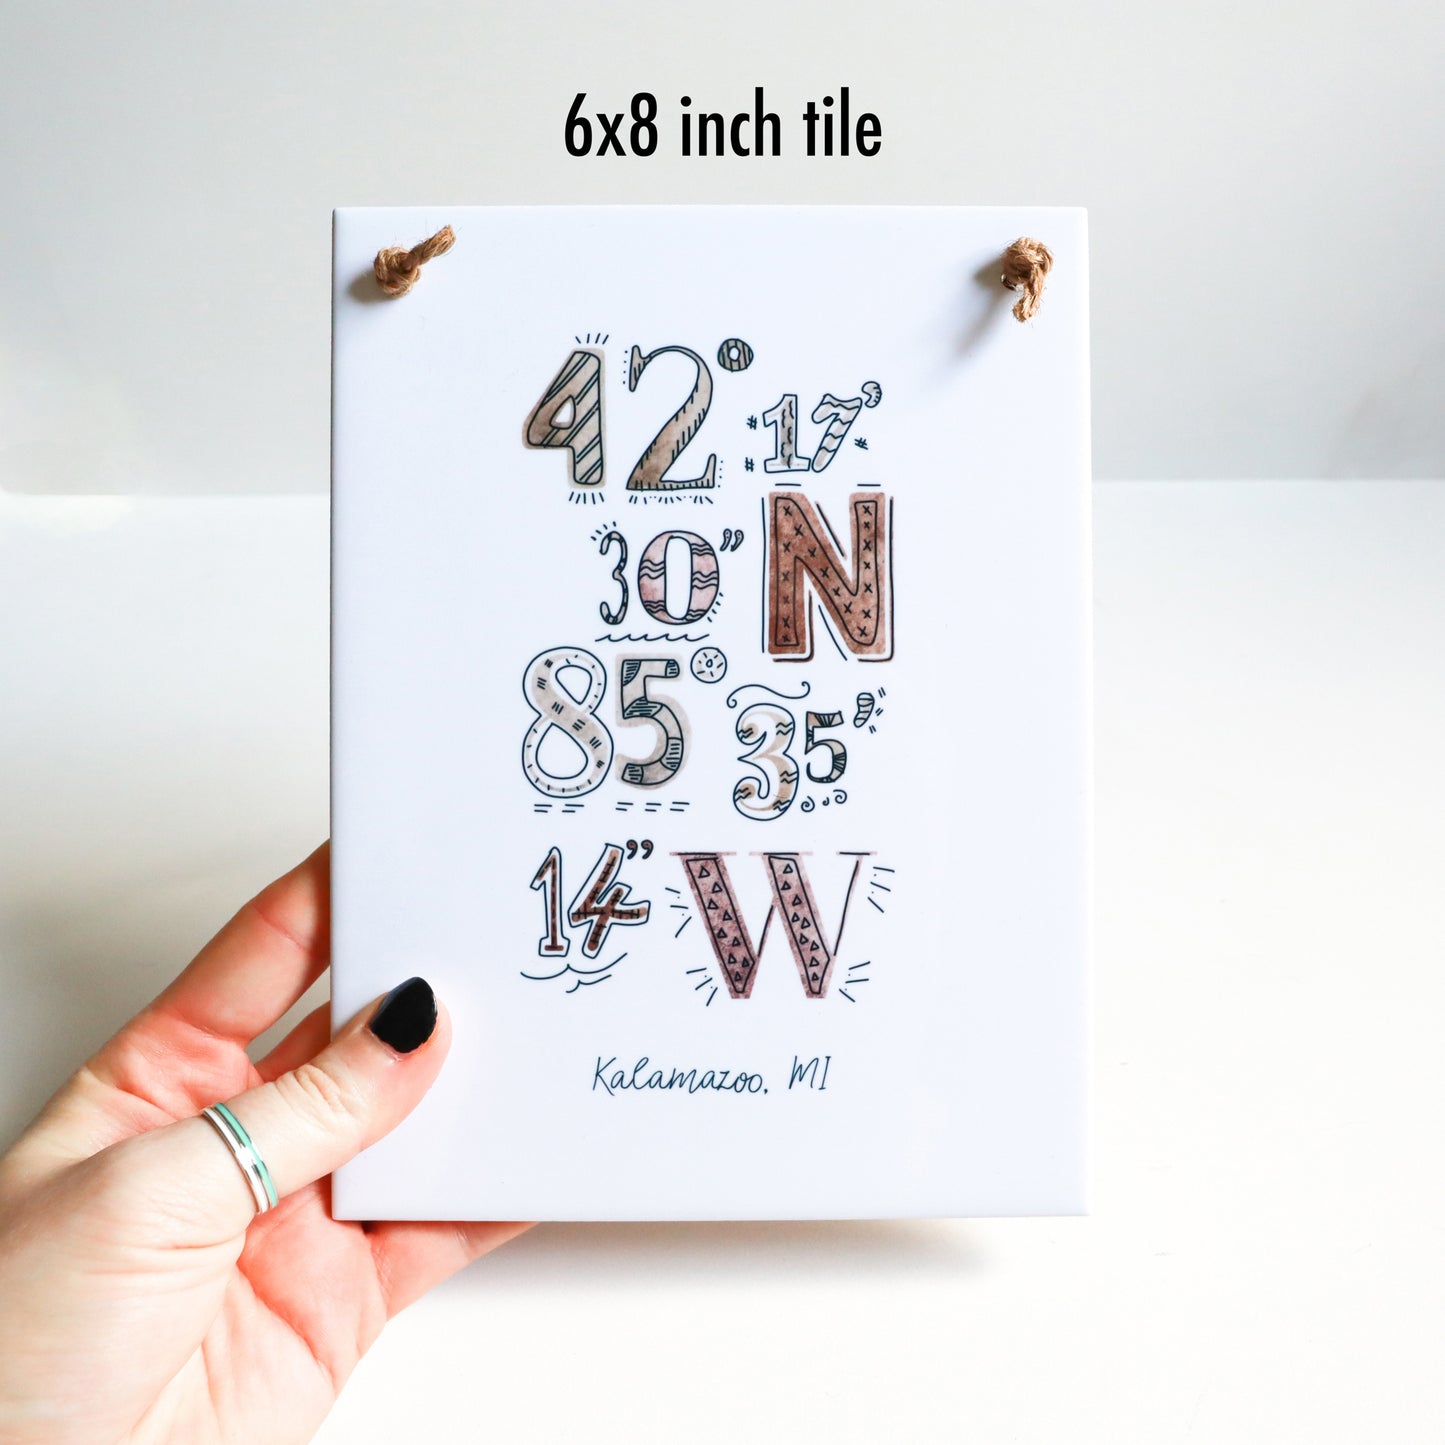 A hand holding the 6x8 in ceramic tile sign, featuring a custom city art coordinates drawing